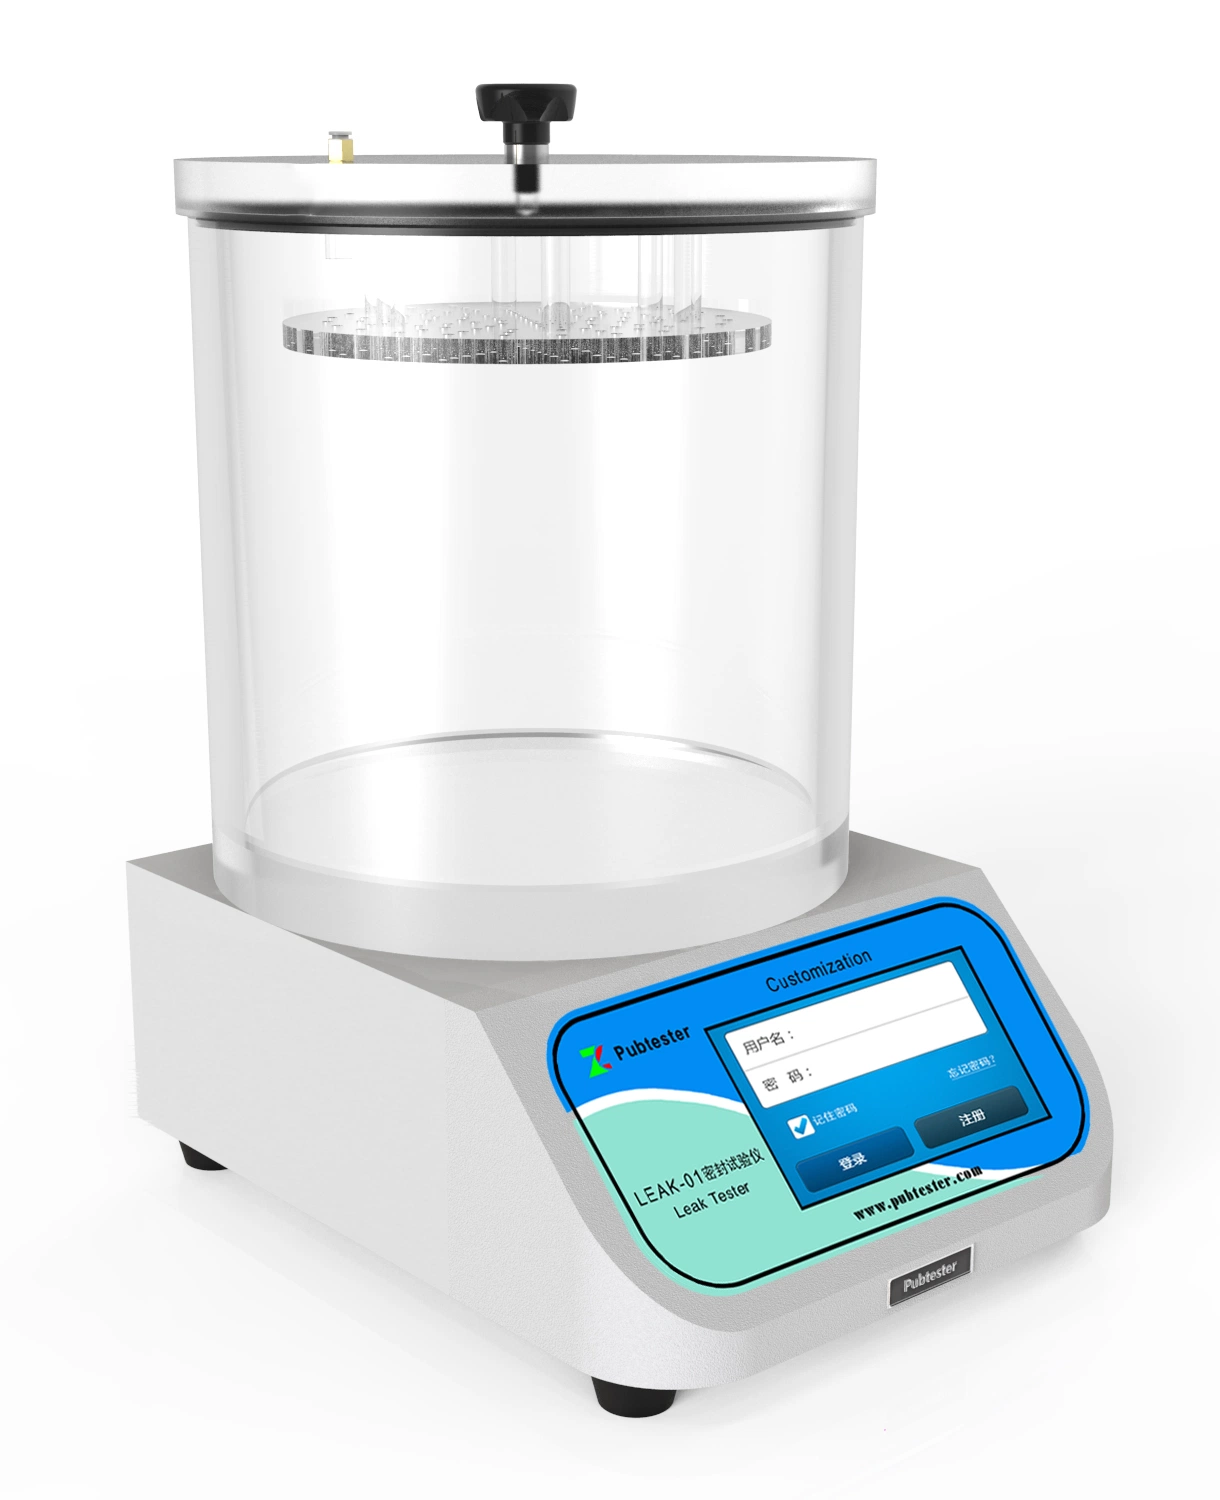 Pubtester Vacuum Leak Tester for Flexible Food Containers